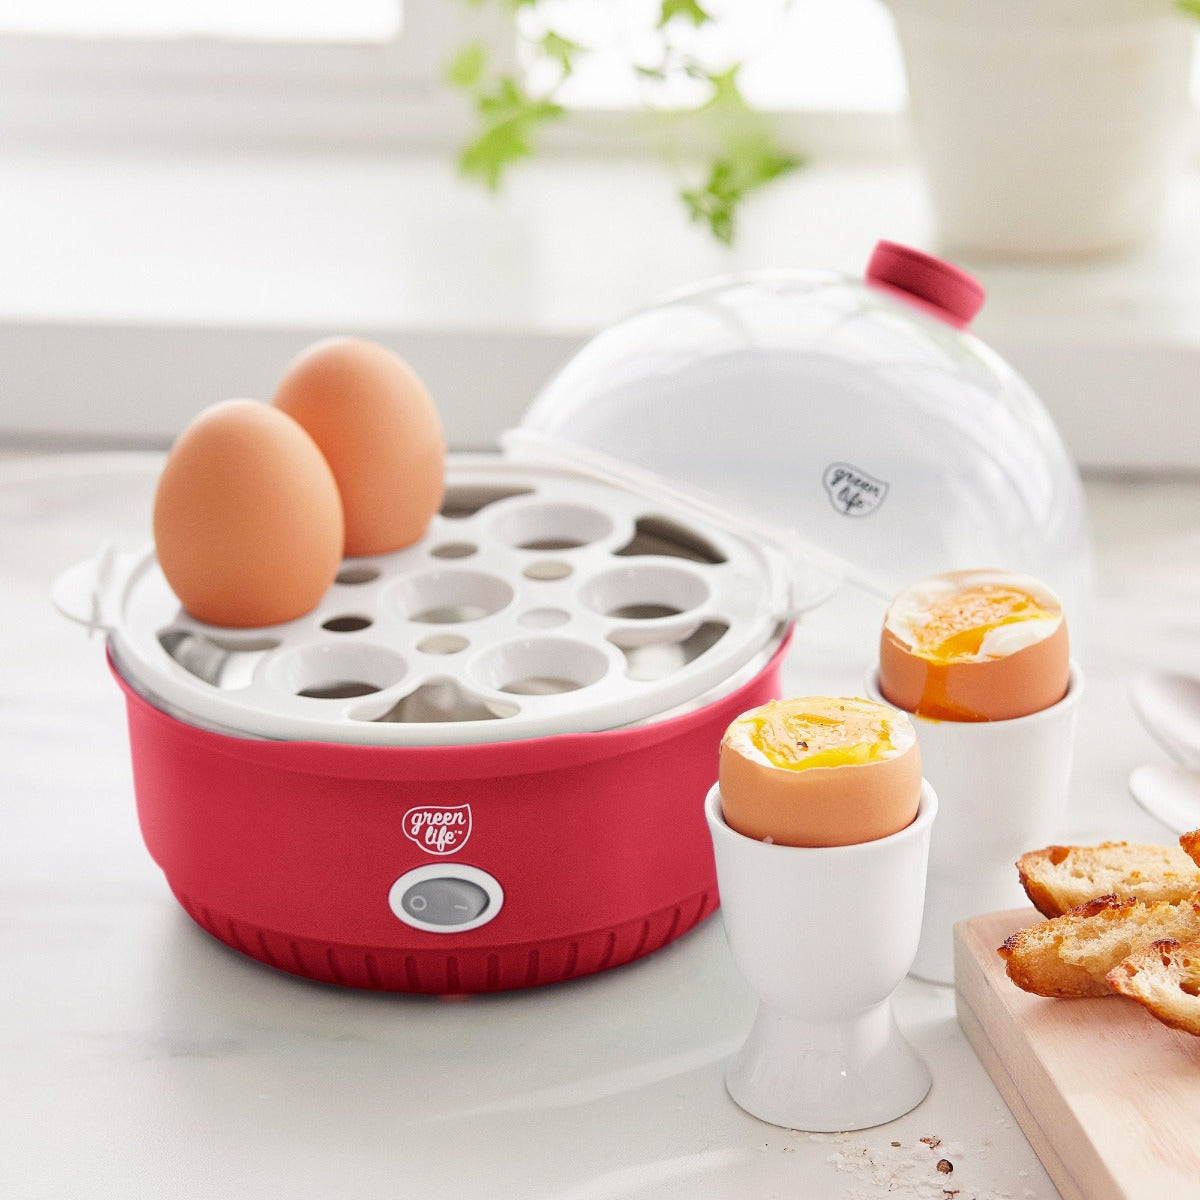 Egg Cooker, Egg Boiler with Steamer Attachment for Soft and Hard